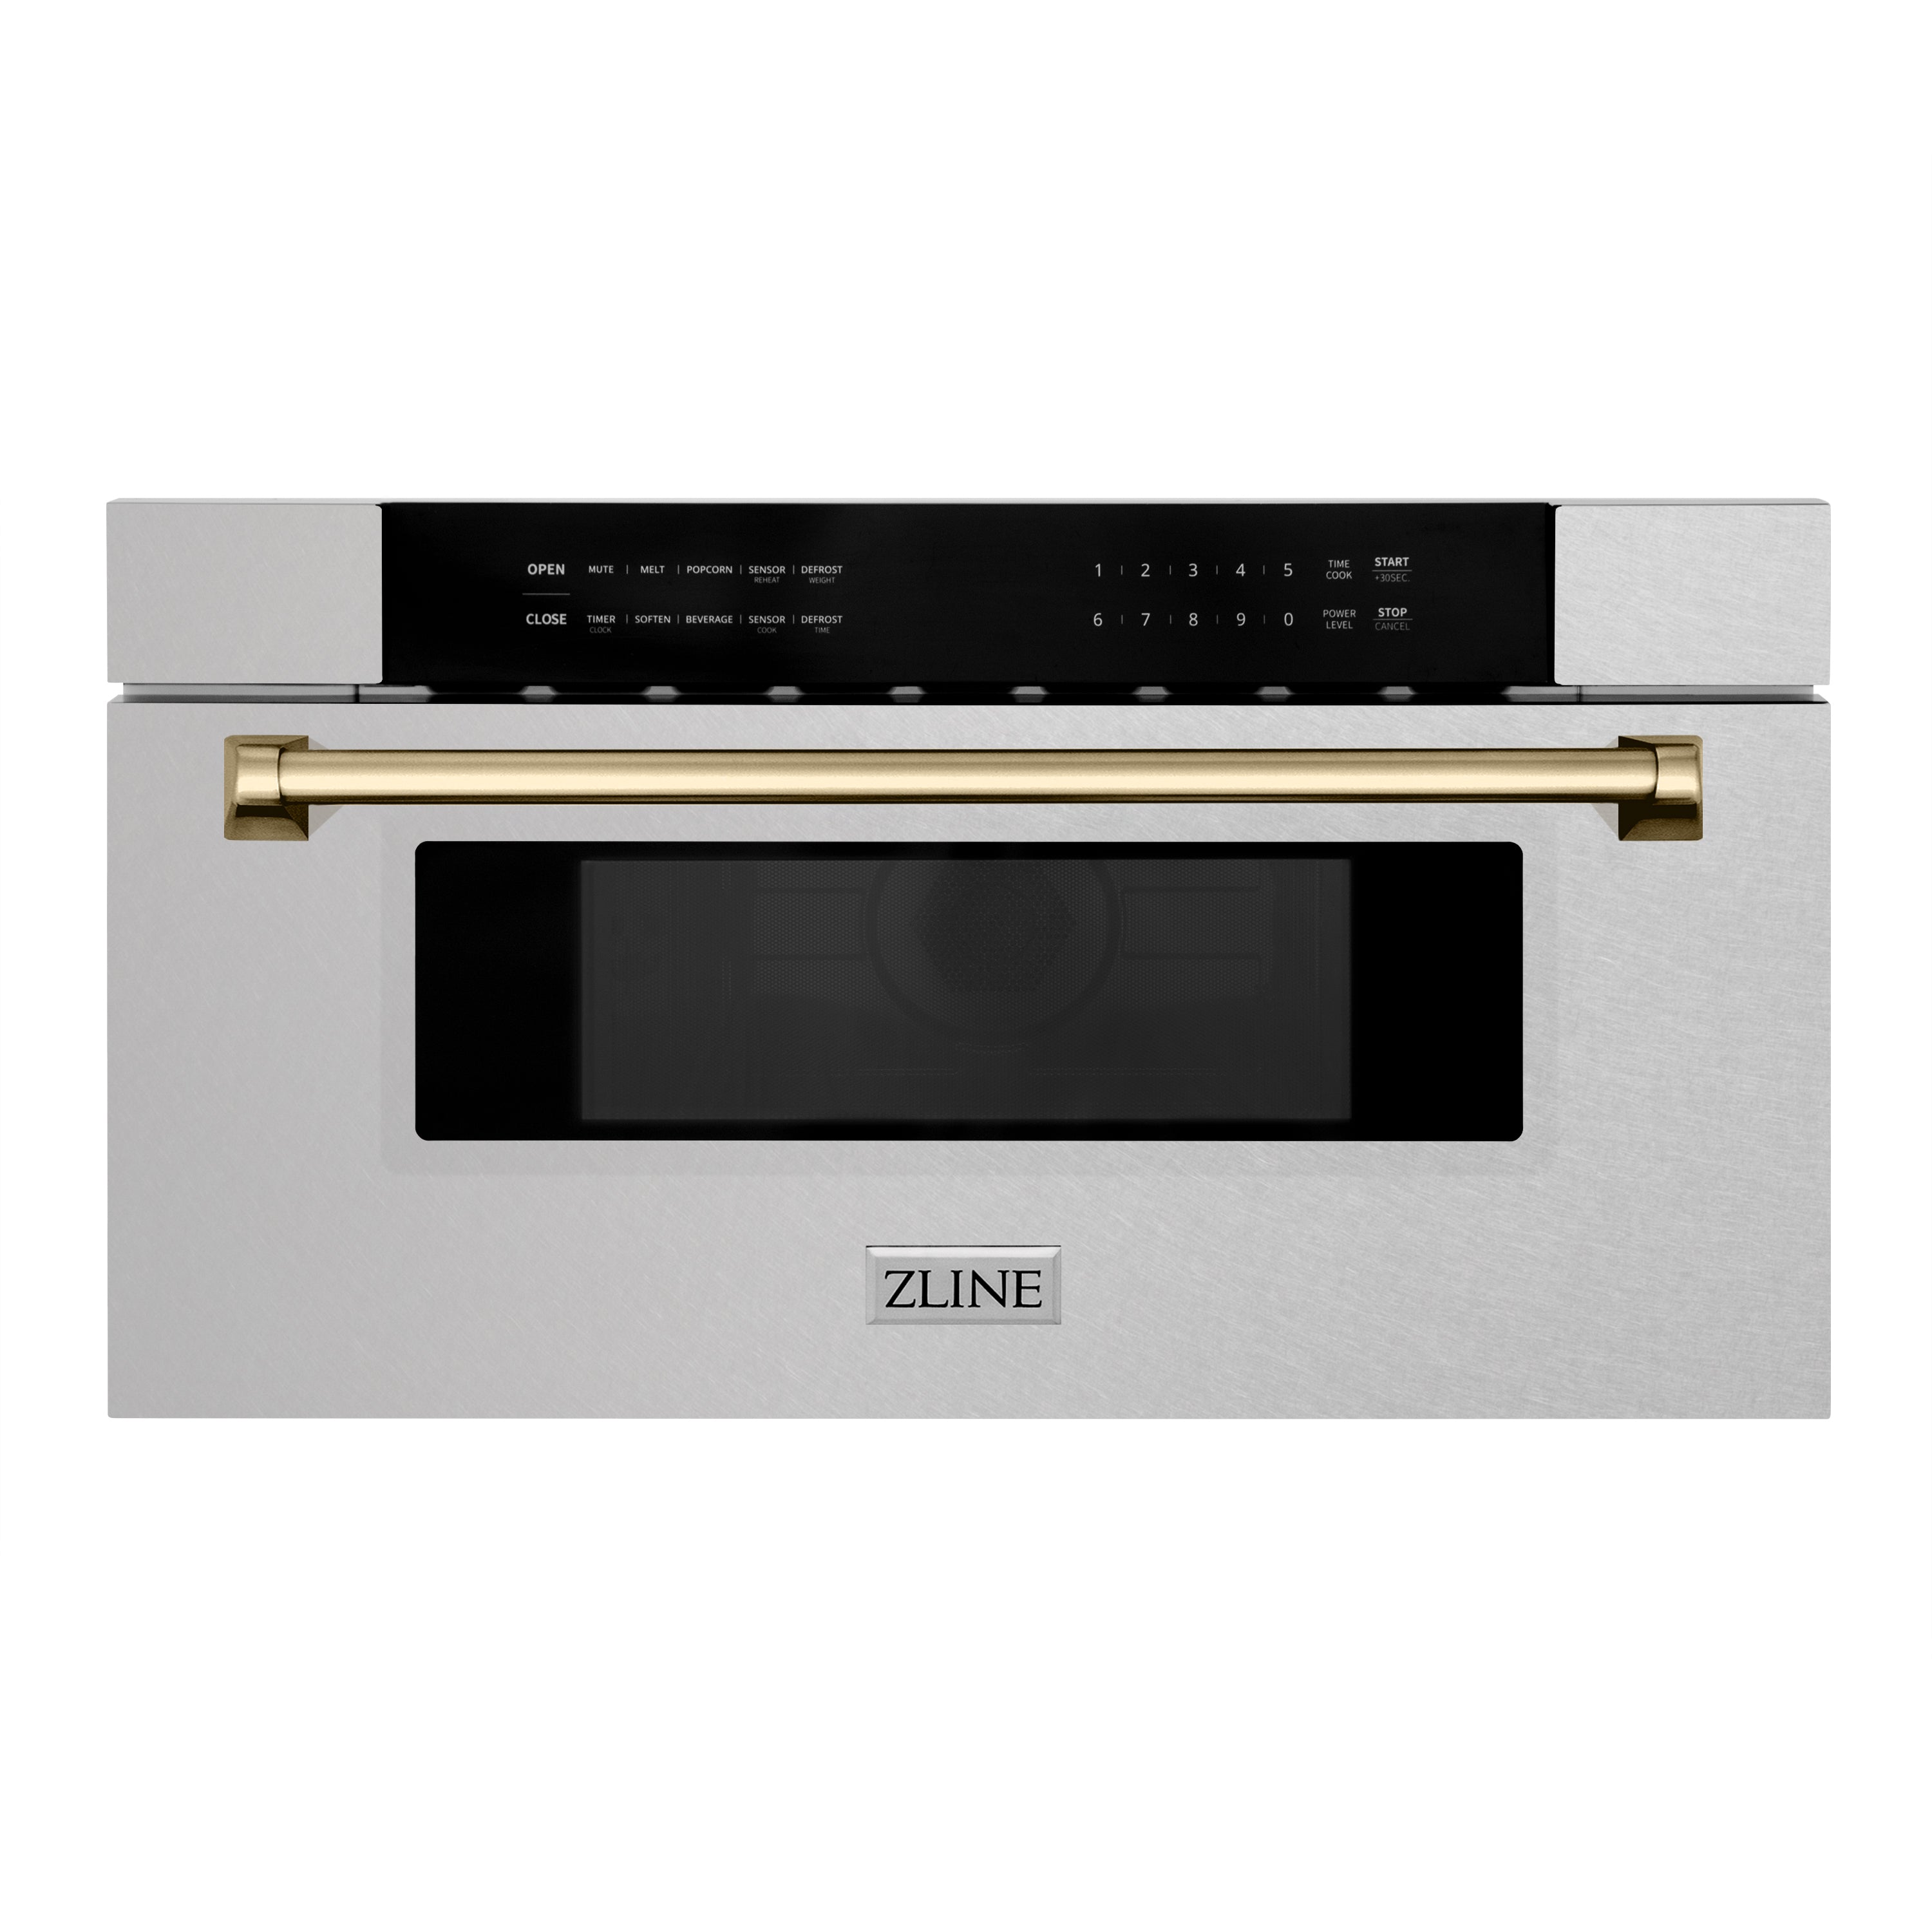 ZLINE Autograph Edition 30 in. 1.2 cu. ft. Built-In Microwave Drawer in Fingerprint Resistant Stainless Steel with Champagne Bronze Accents (MWDZ-30-SS-CB) Front View Drawer Closed